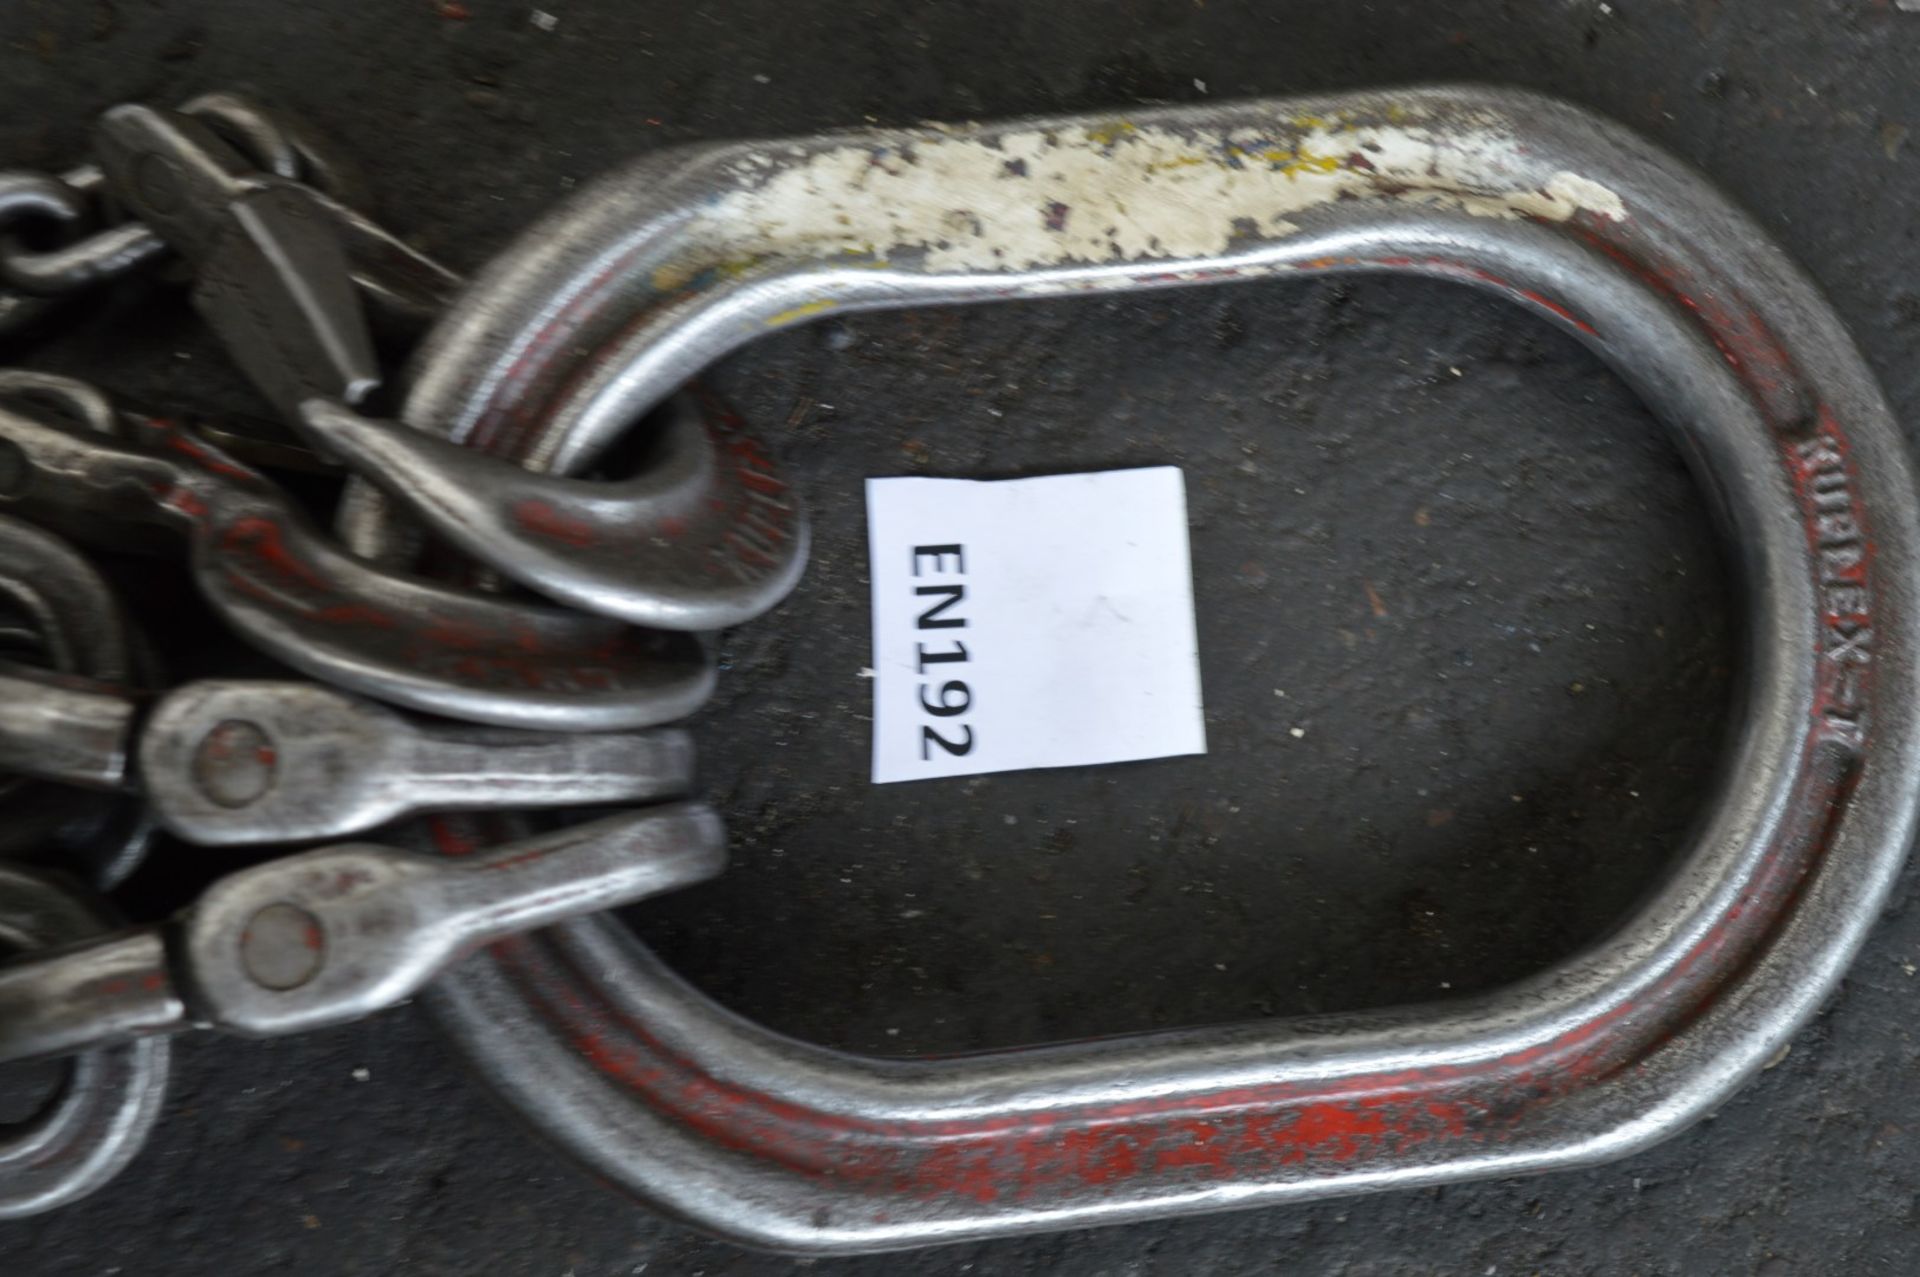 1 x Kuplex Lifting Chain With Various Sling Eye Hooks - Heavy Duty Lifting Equipment - CL202 - Ref - Image 7 of 7